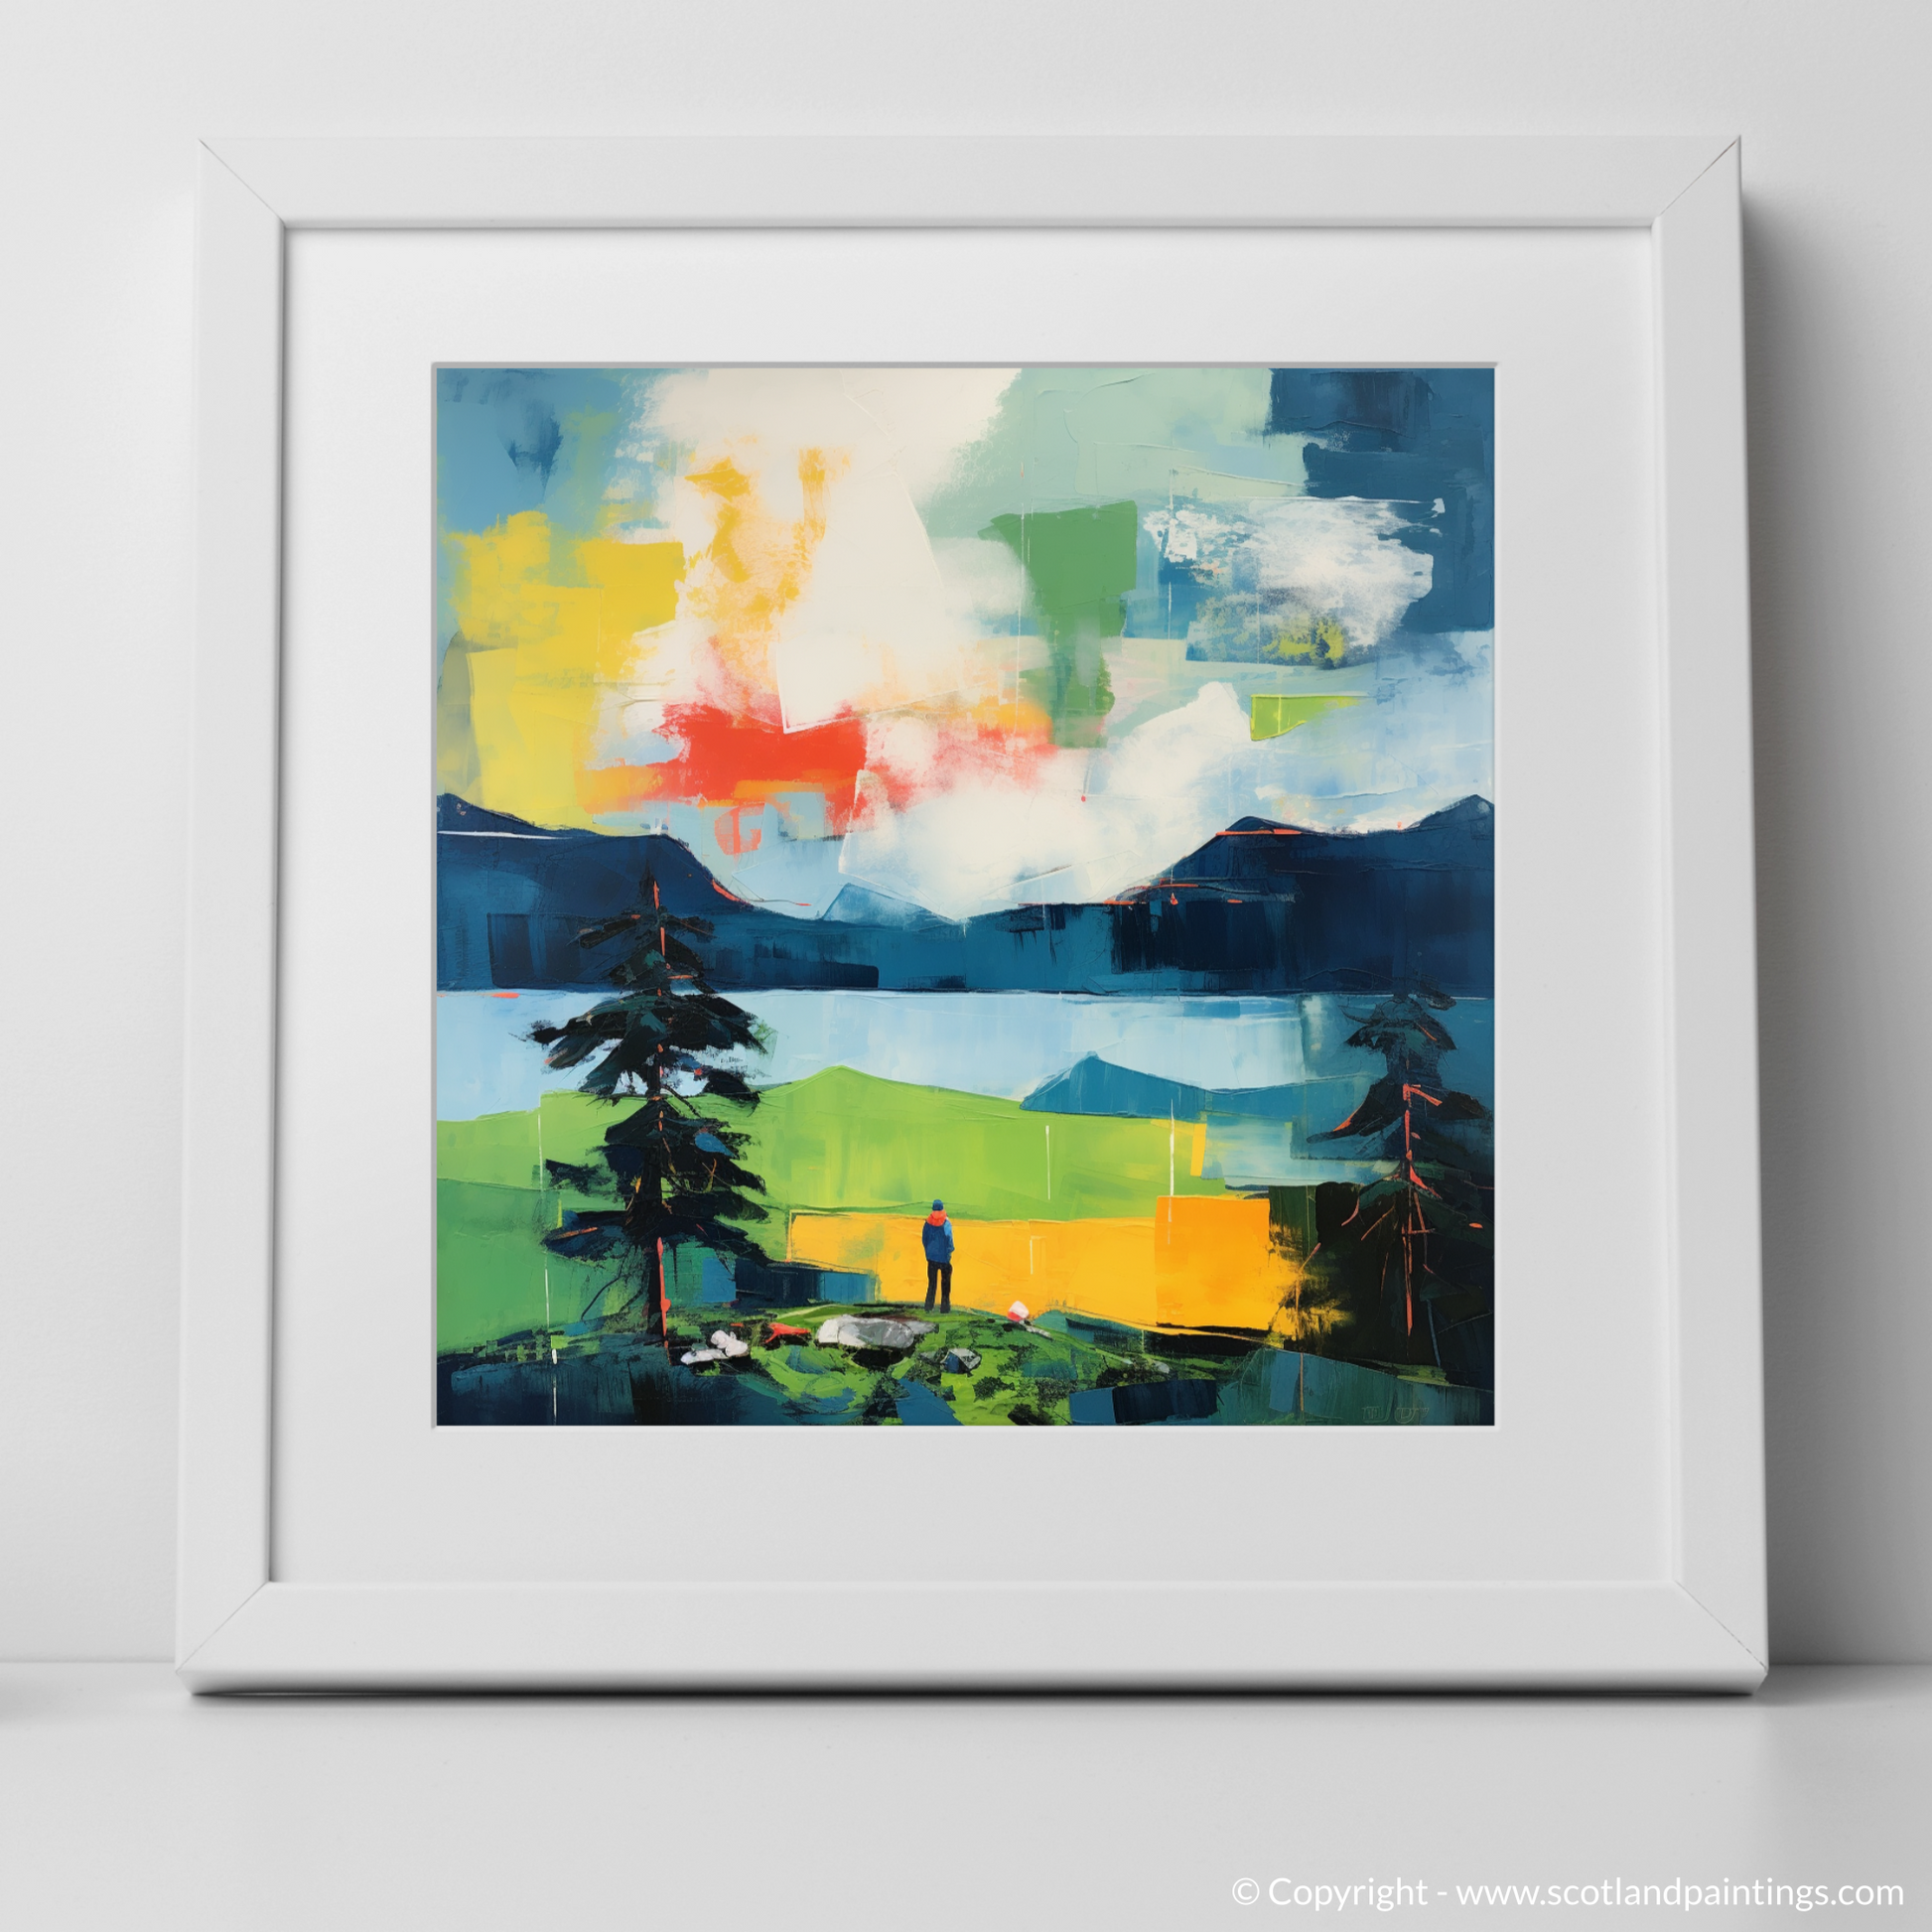 Art Print of Two hikers looking out on Loch Lomond with a white frame